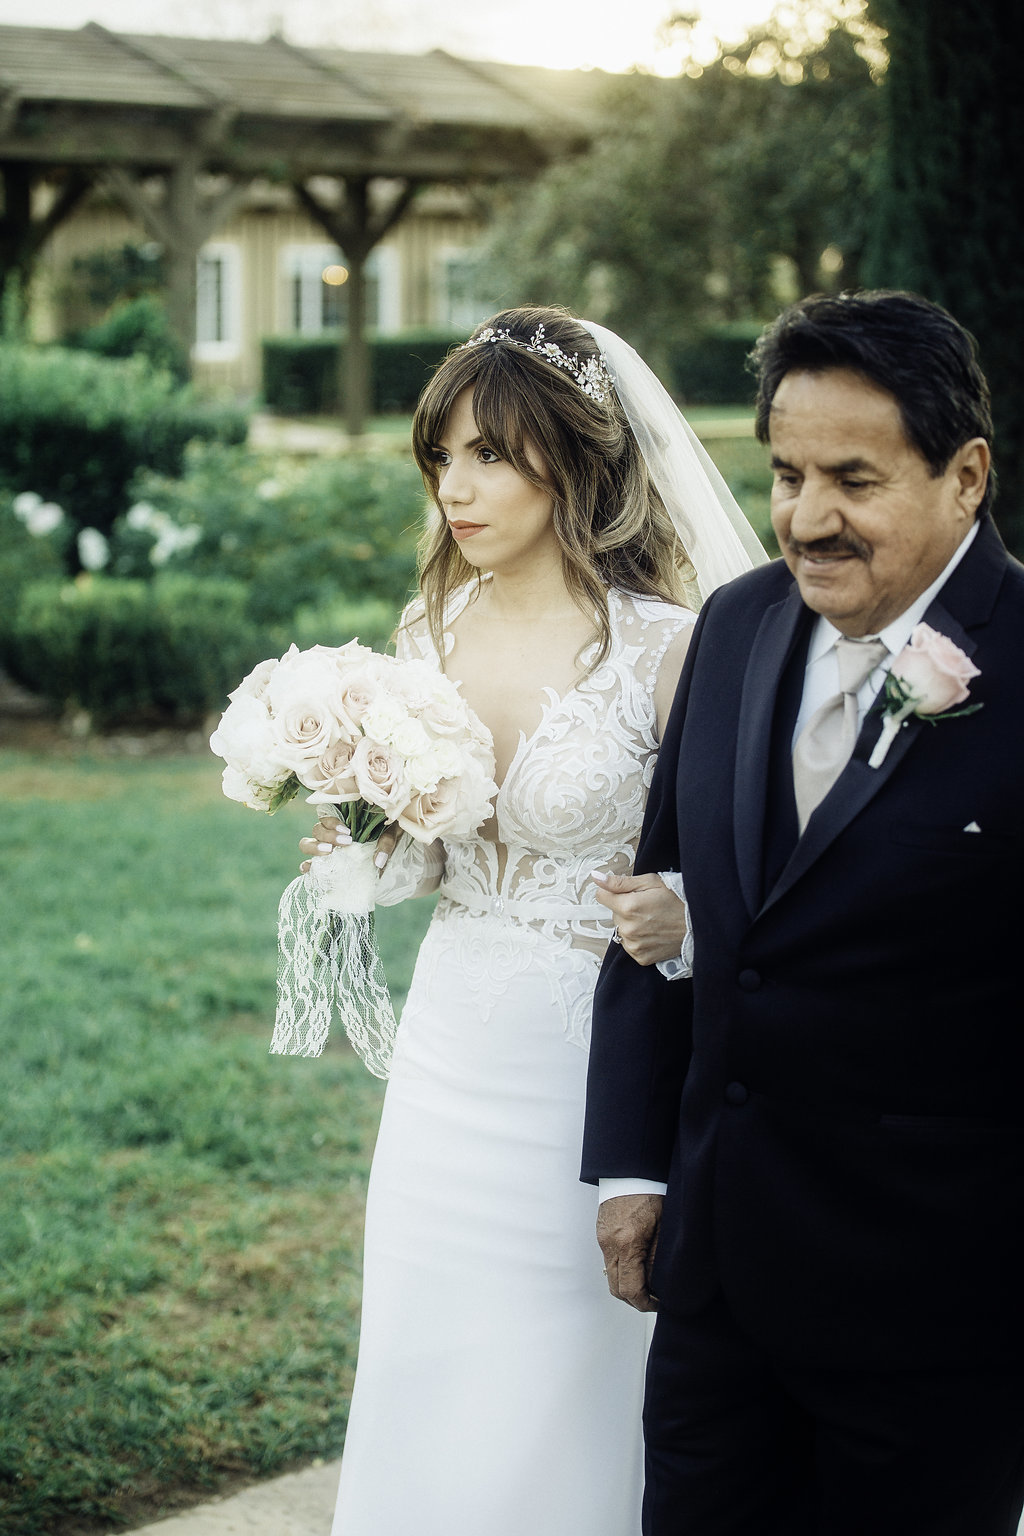 Wedding Photograph Of Father And Bride Walking Down The Aisle Los Angeles